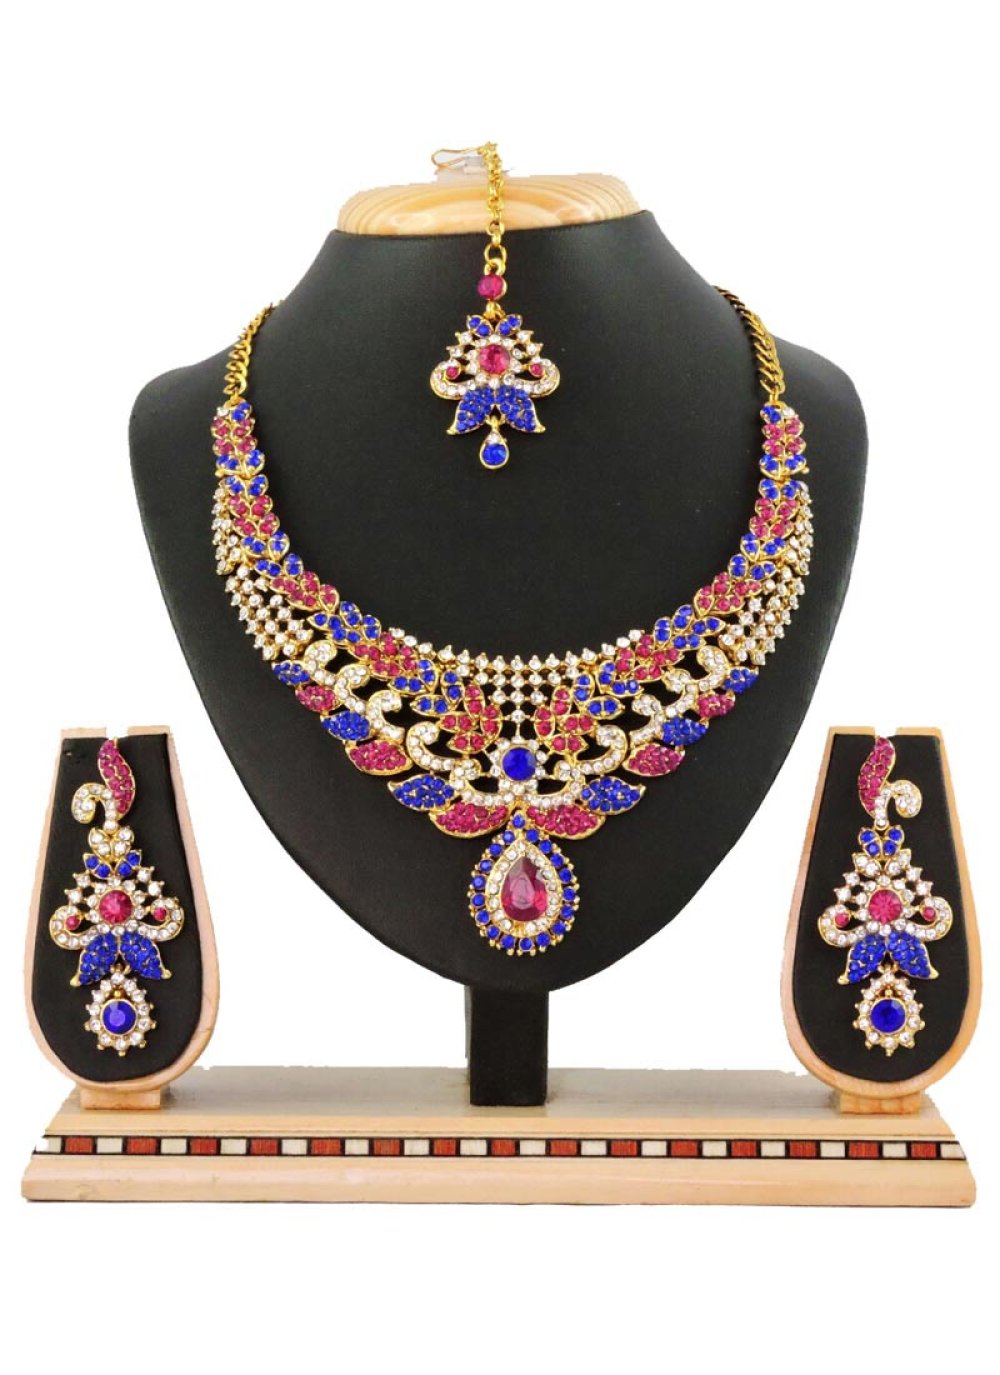 Lordly Gold Rodium Polish Stone Work Alloy Blue and Rose Pink Necklace Set